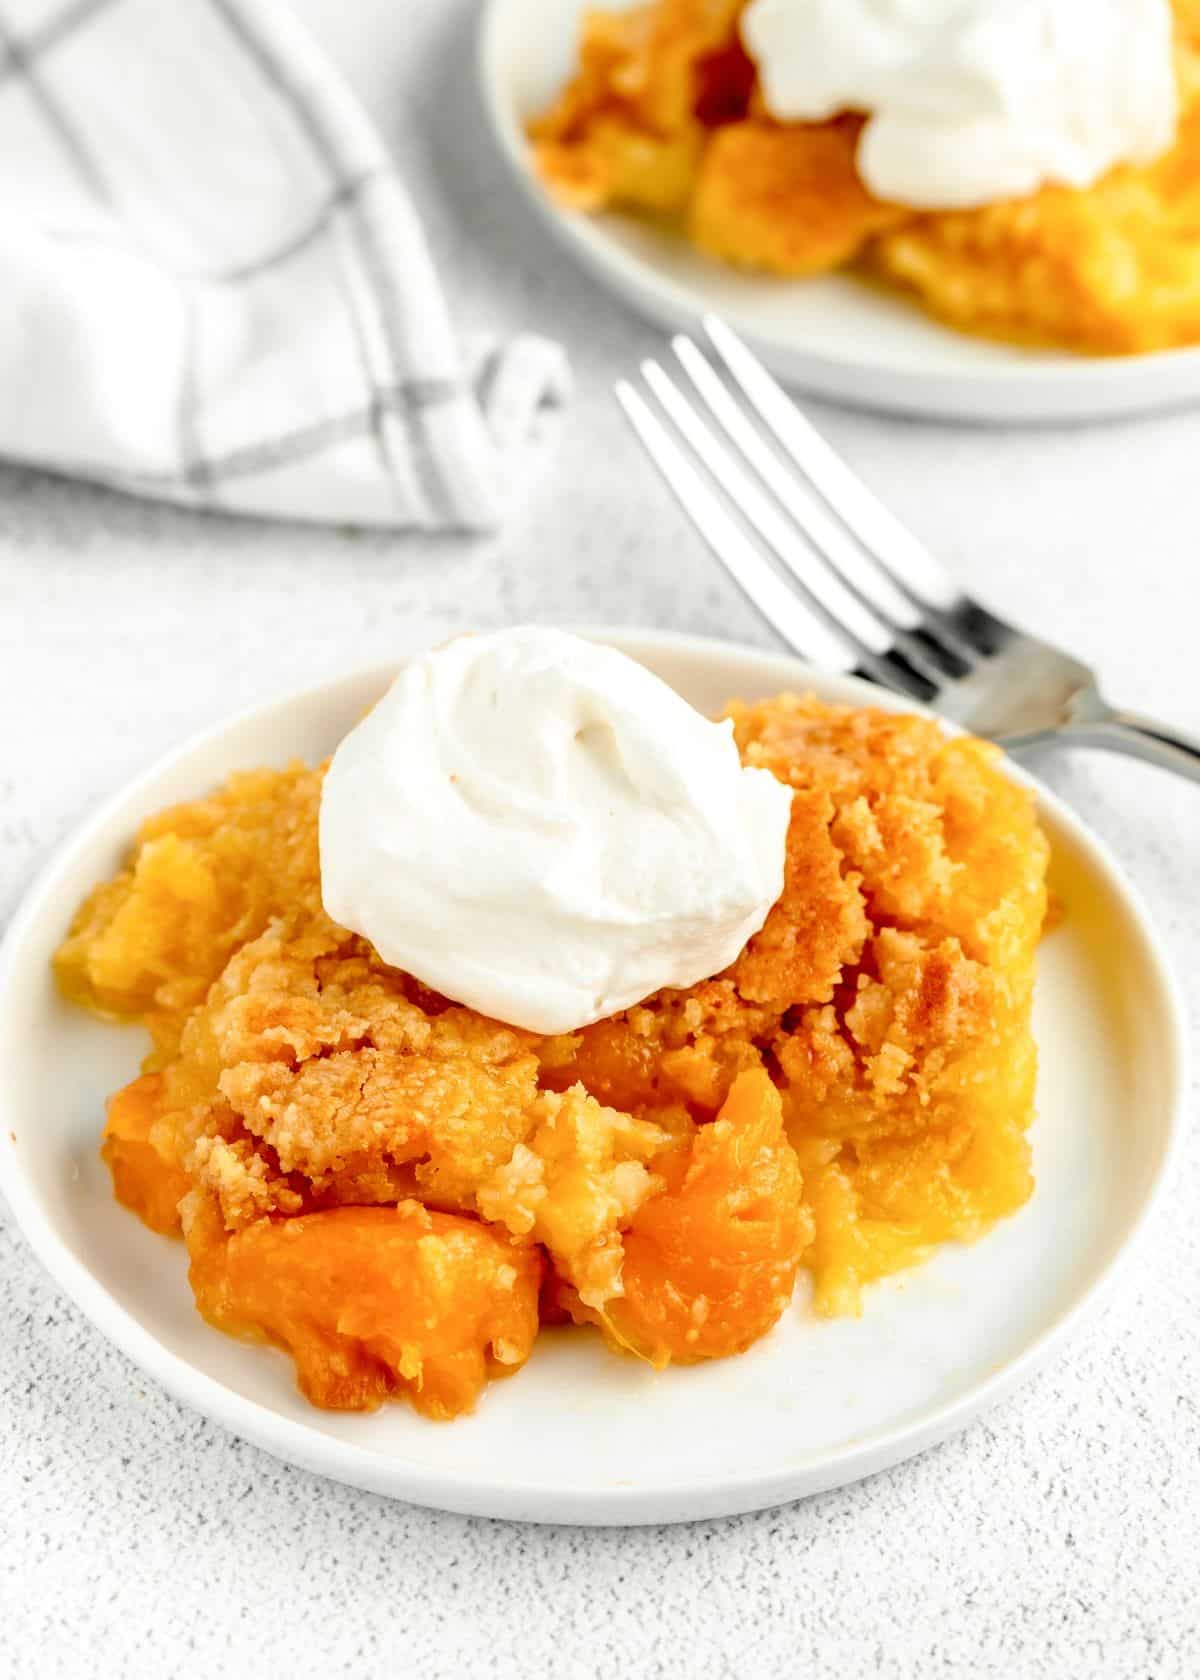 A piece of mouth-watering peach dump cake on a white plate.